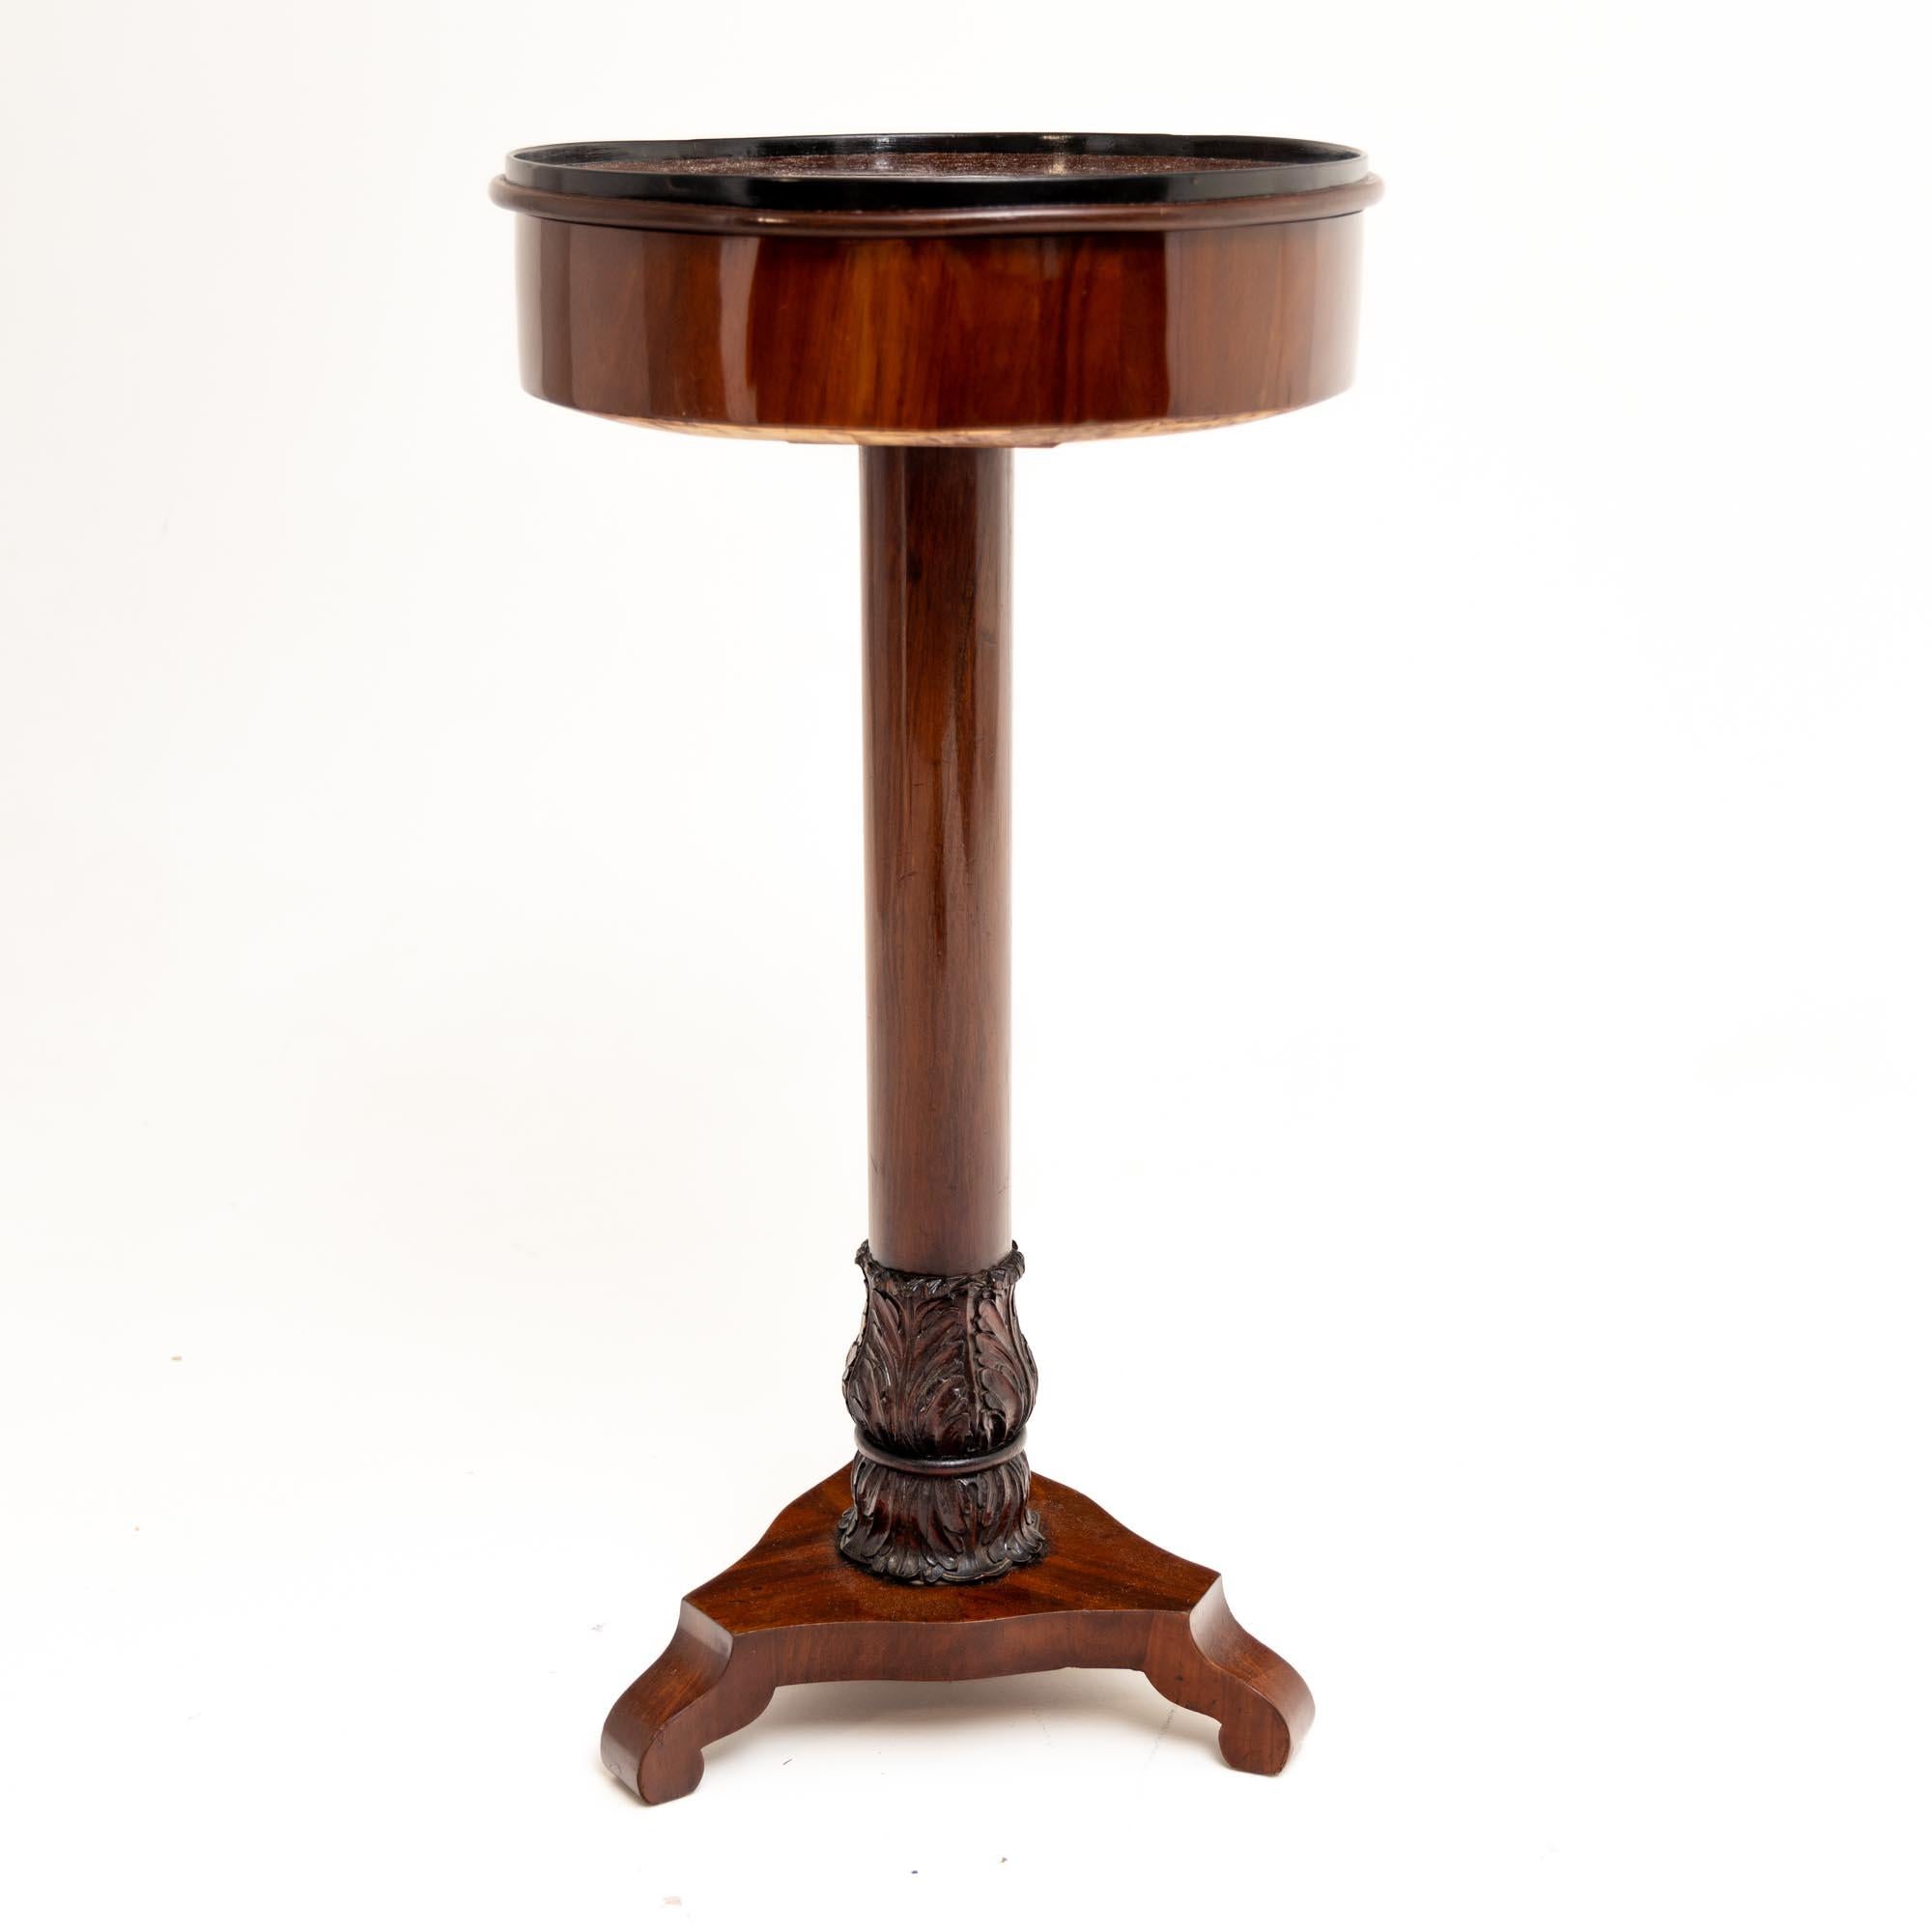 Small side table on a trefoil base with volute-shaped legs and carved leaf decorations in the lower section. Above it rises the smooth central column and the round table top with smooth frame. The lid with ebonised edge is removable and reveals the